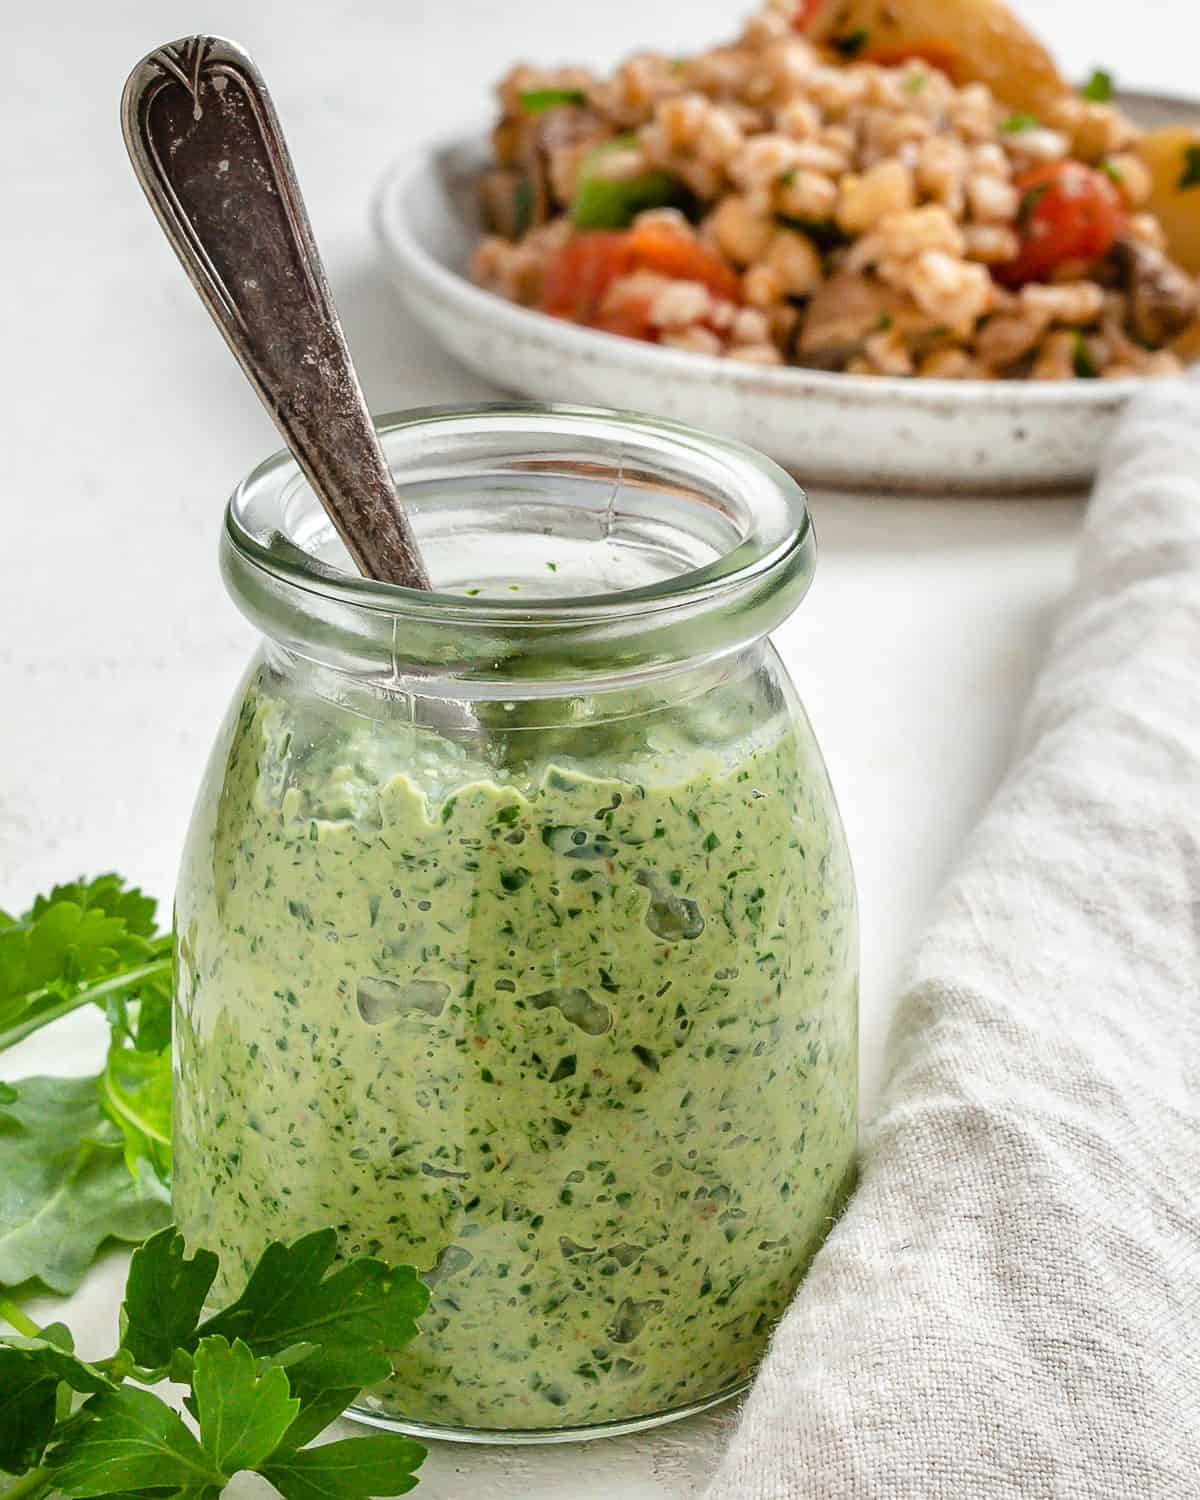 completed Parsley Pesto with Arugula in a jar alongside a plated dish